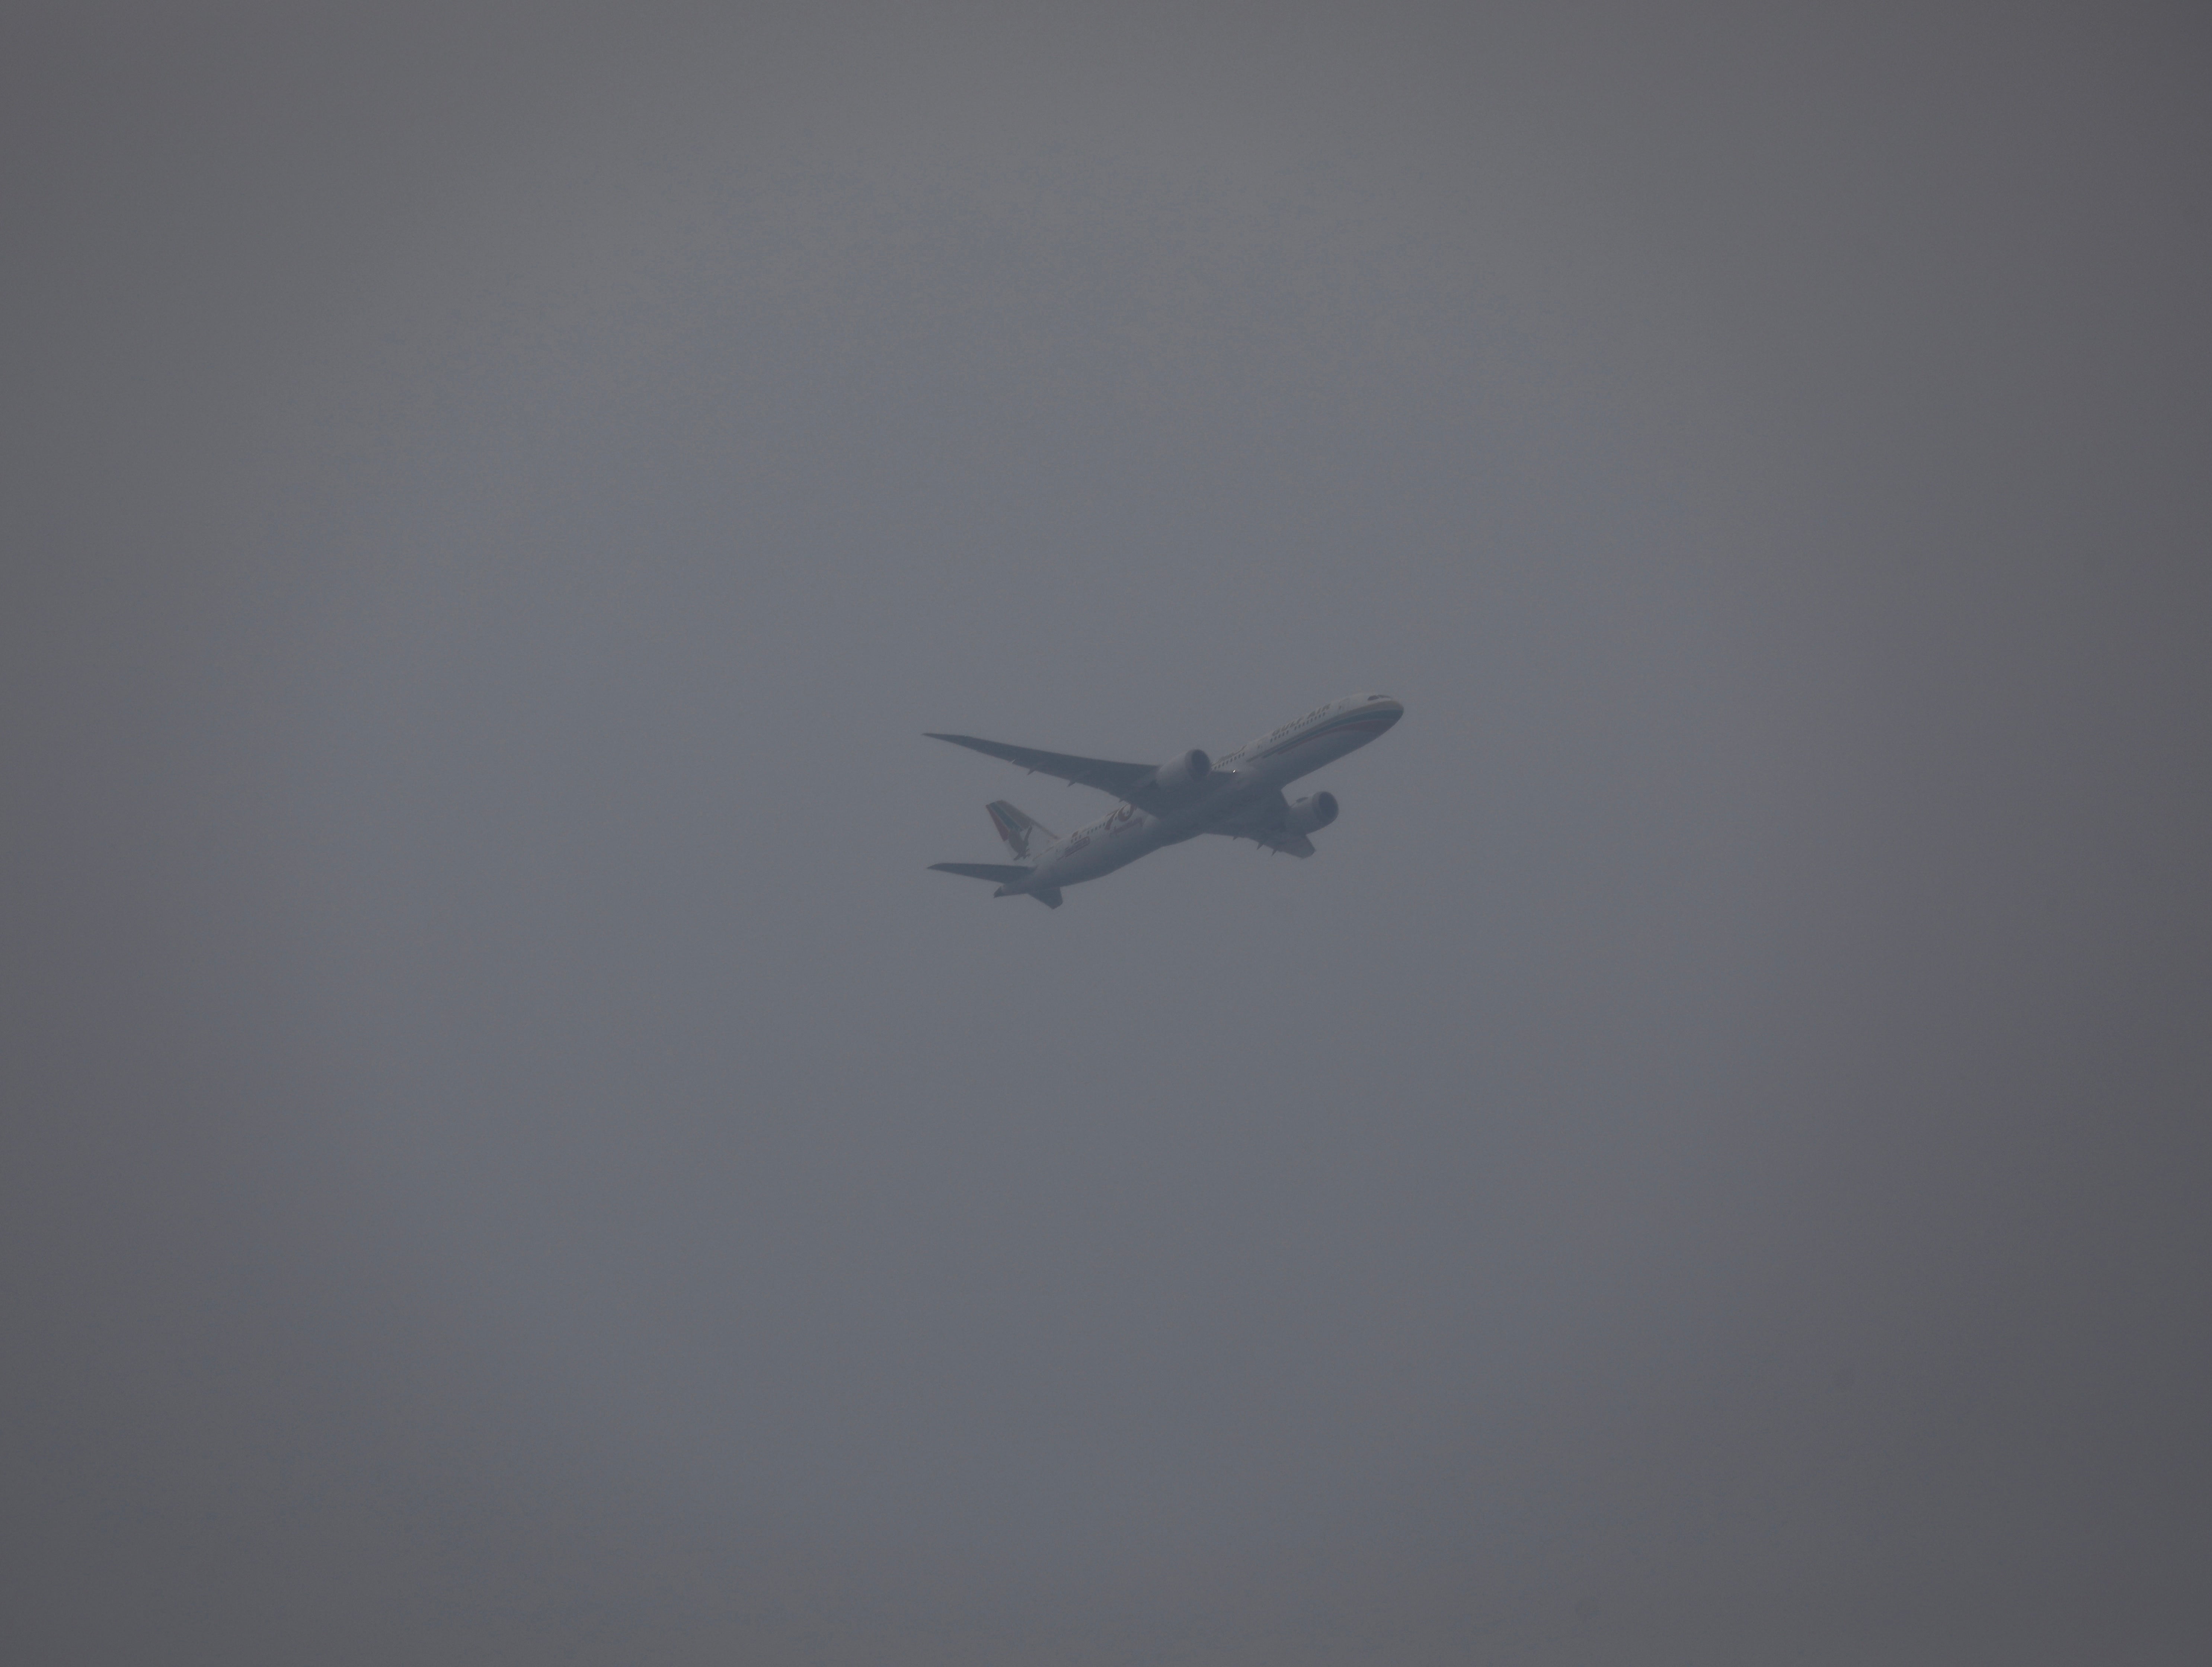 An airplane flies on a sky shrouded with smog in Taguig city, Philippines